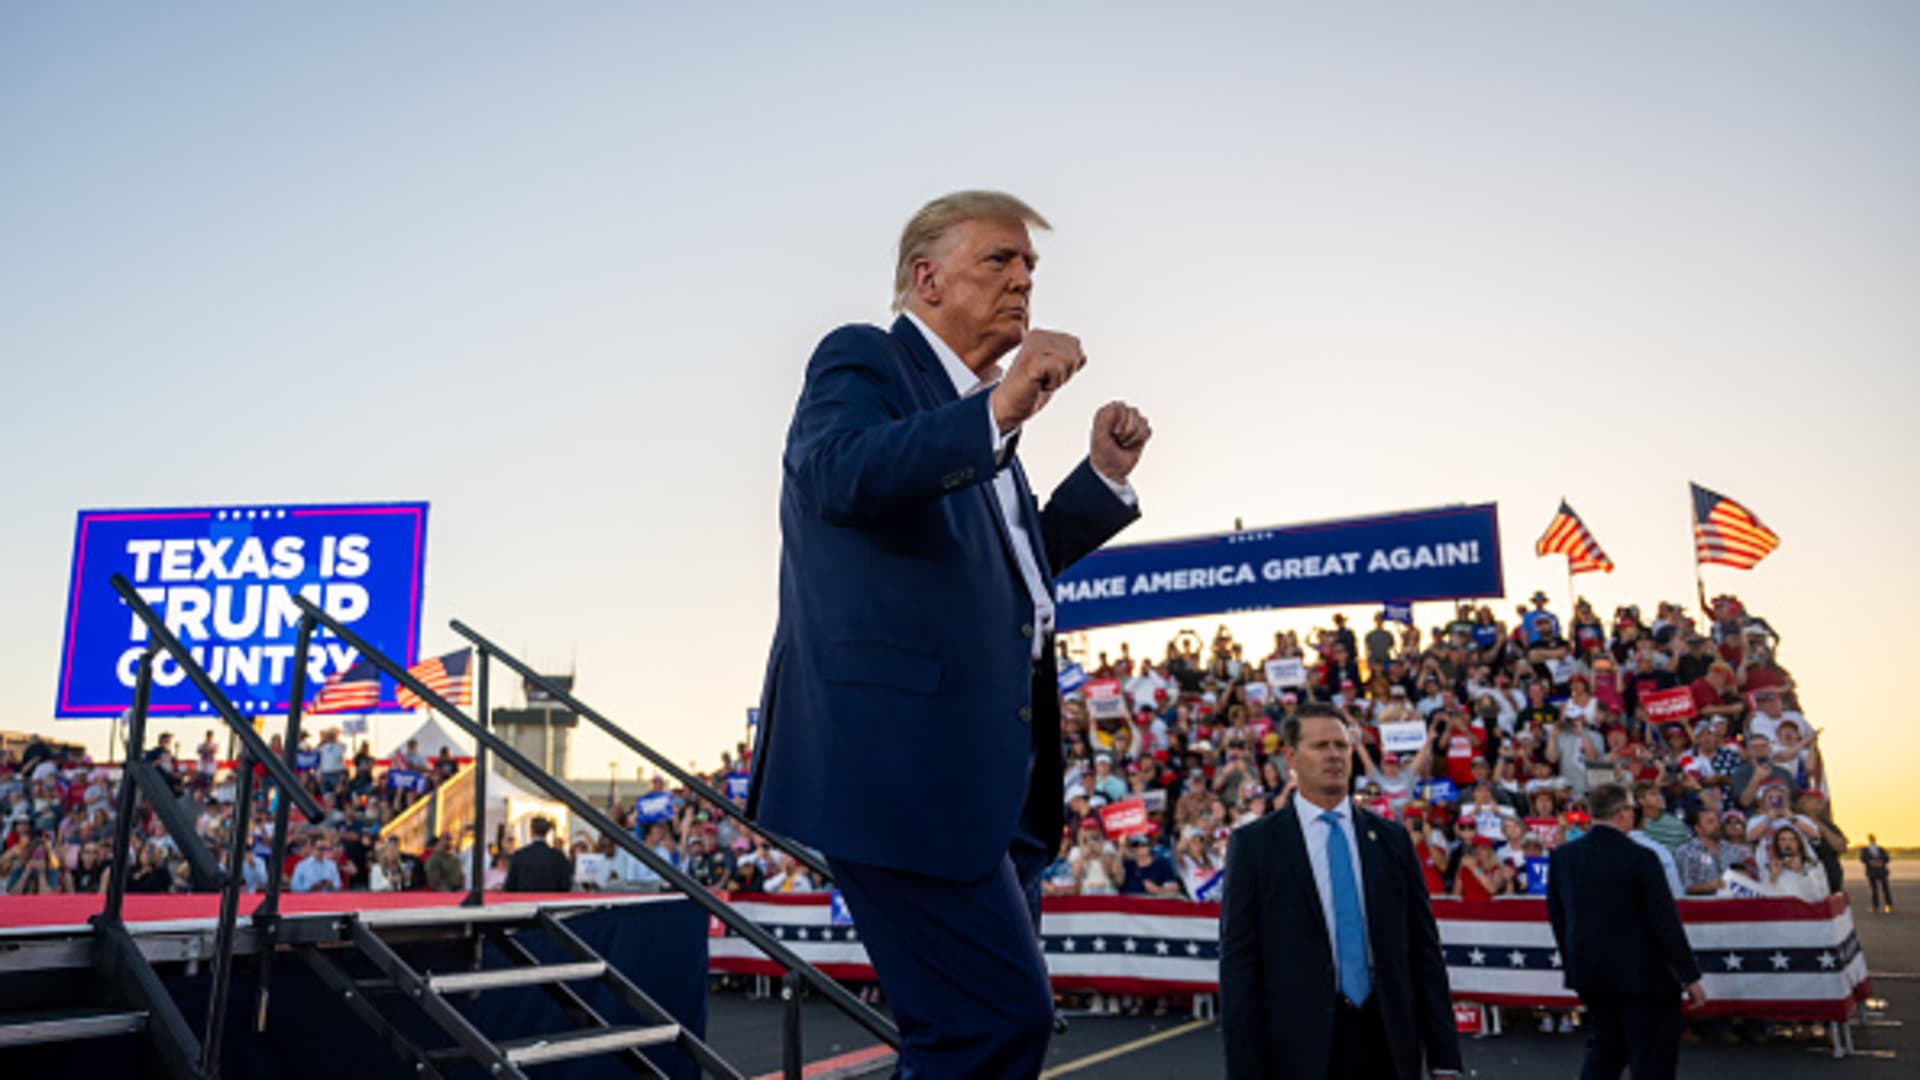 Former U.S. President Donald Trump at first rally since announcing his 2024 presidential campaign, at the Waco Regional Airport on March 25, 2023 in Waco, Texas.